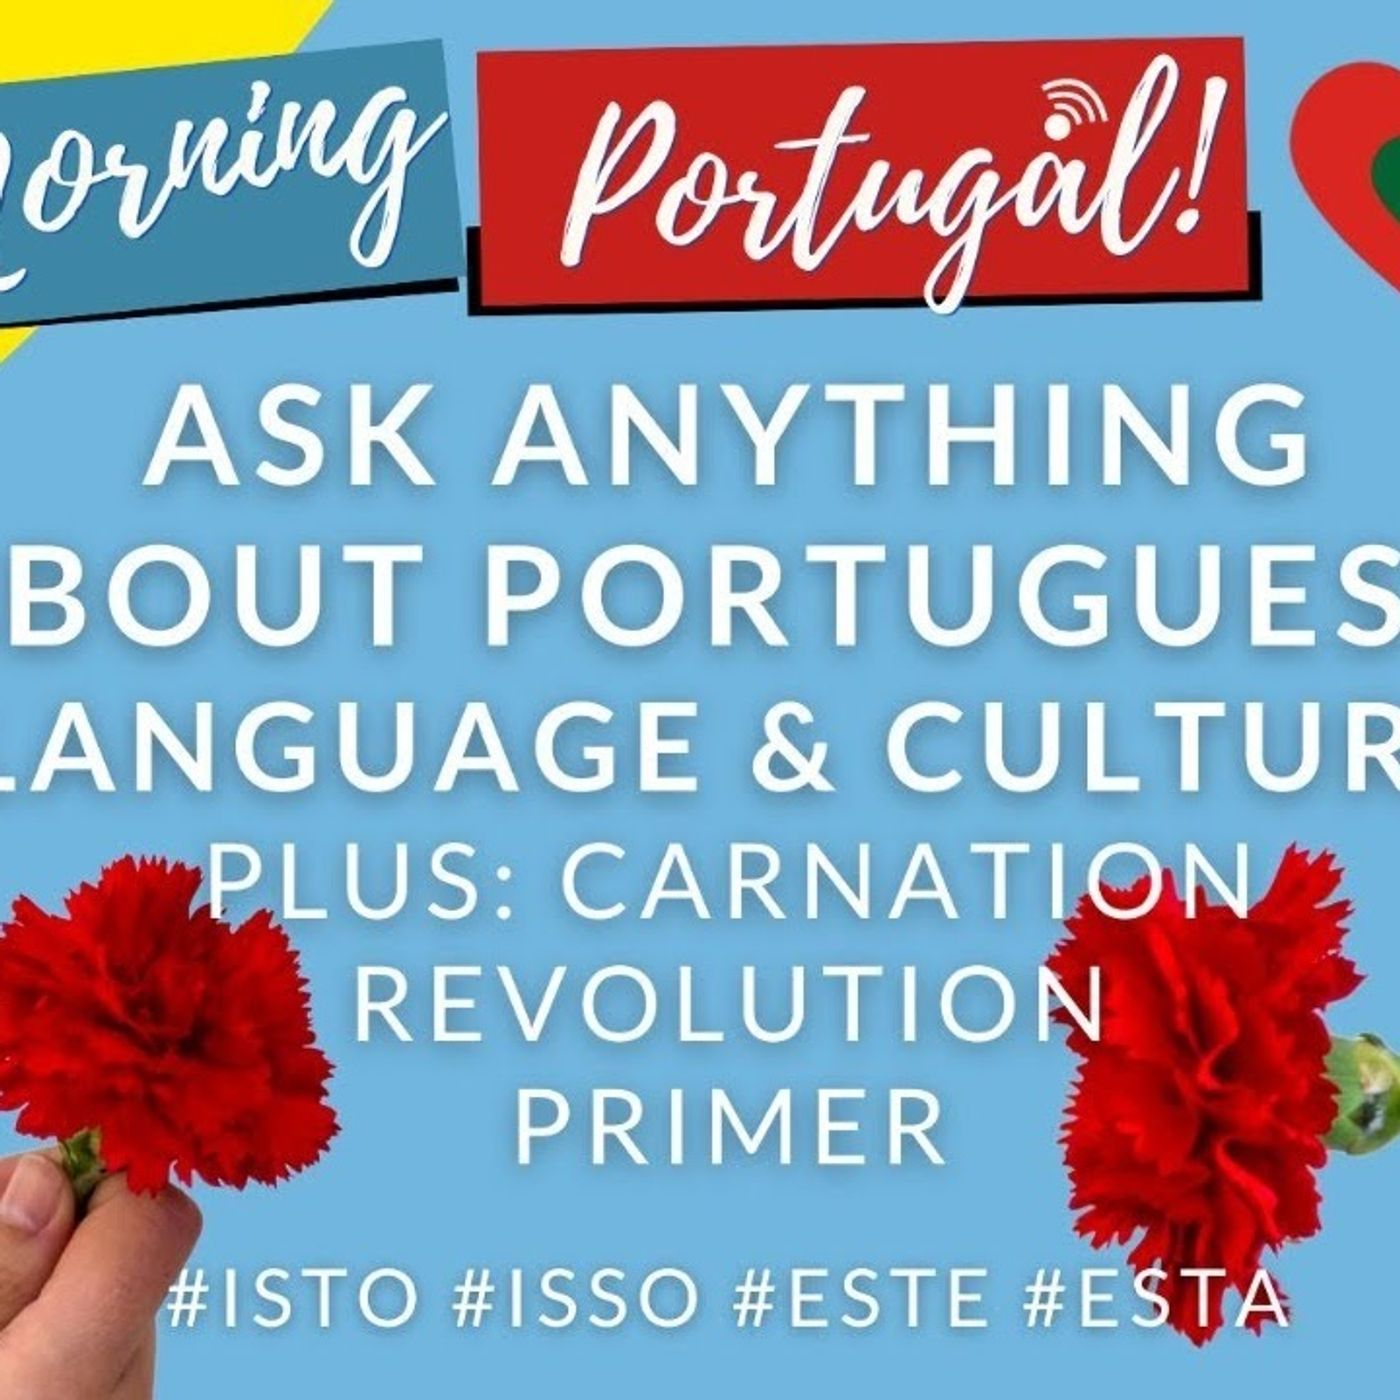 ASK ANYTHING about Portuguese! (Language & Culture) PLUS: Carnation Revolution PRIMER